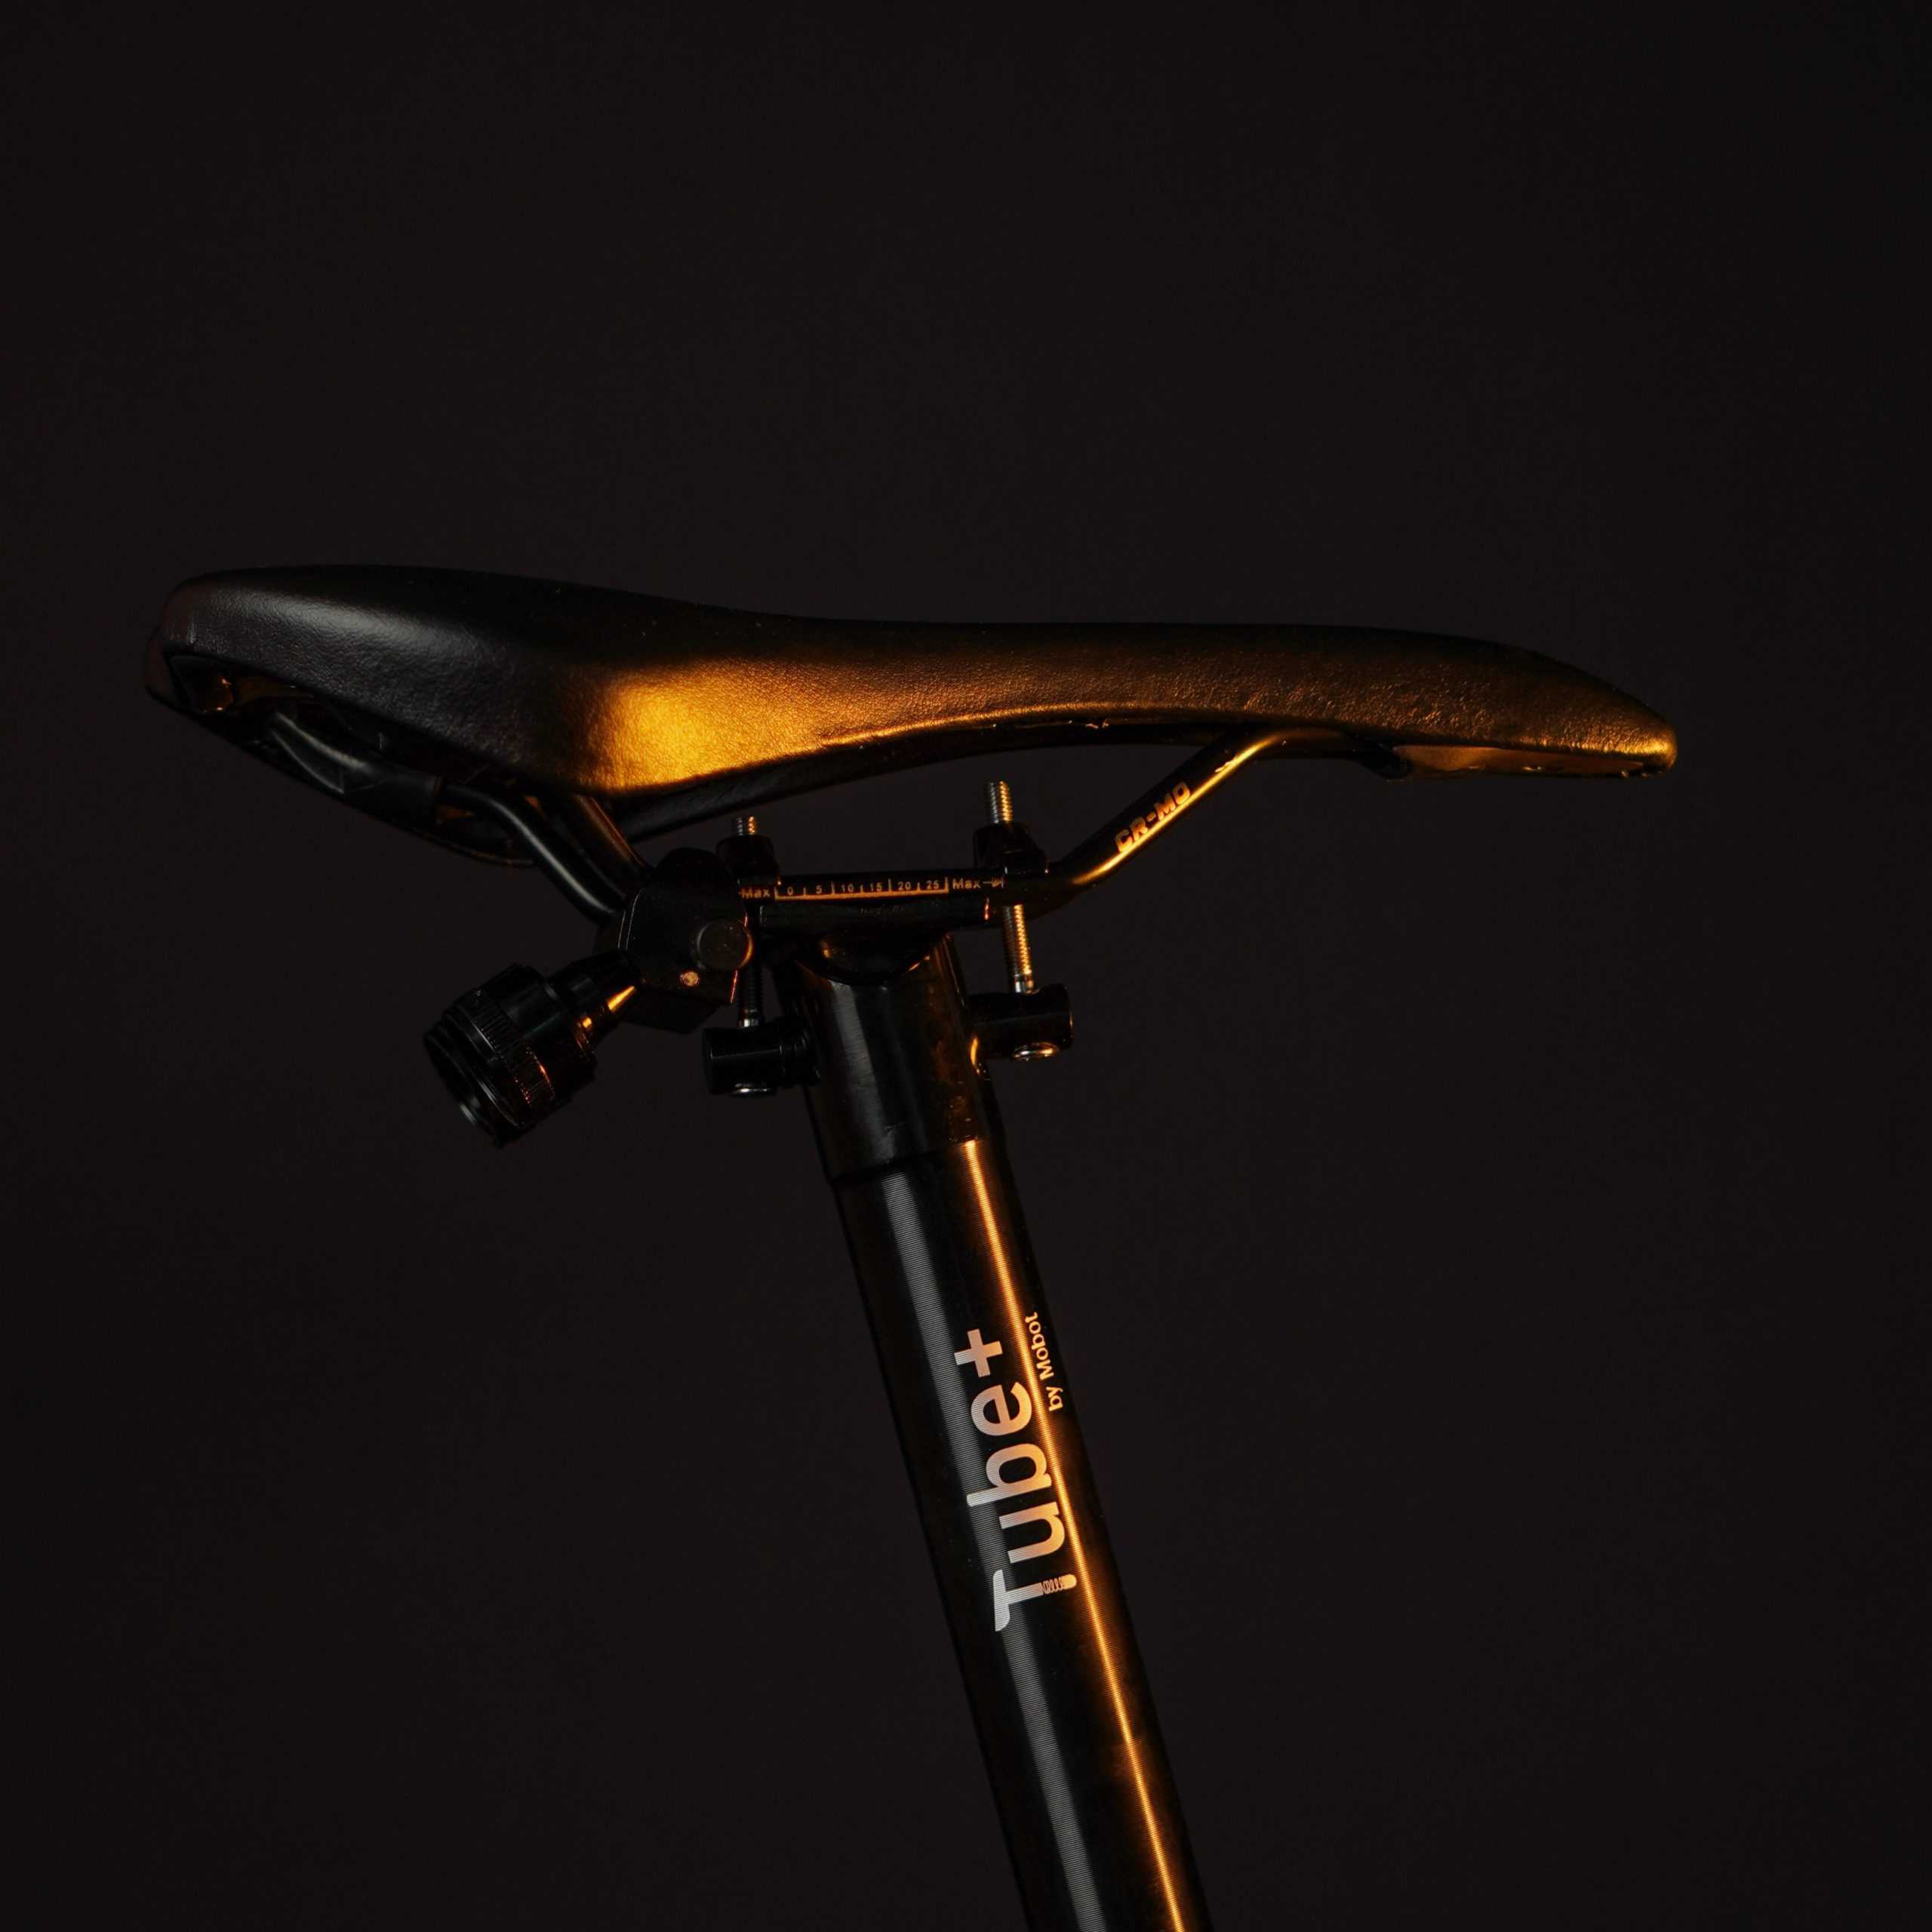 Titaniumseatpost scaled - Launch of Royale by Mobot 7.6kg Titanium Tri-fold bicycle